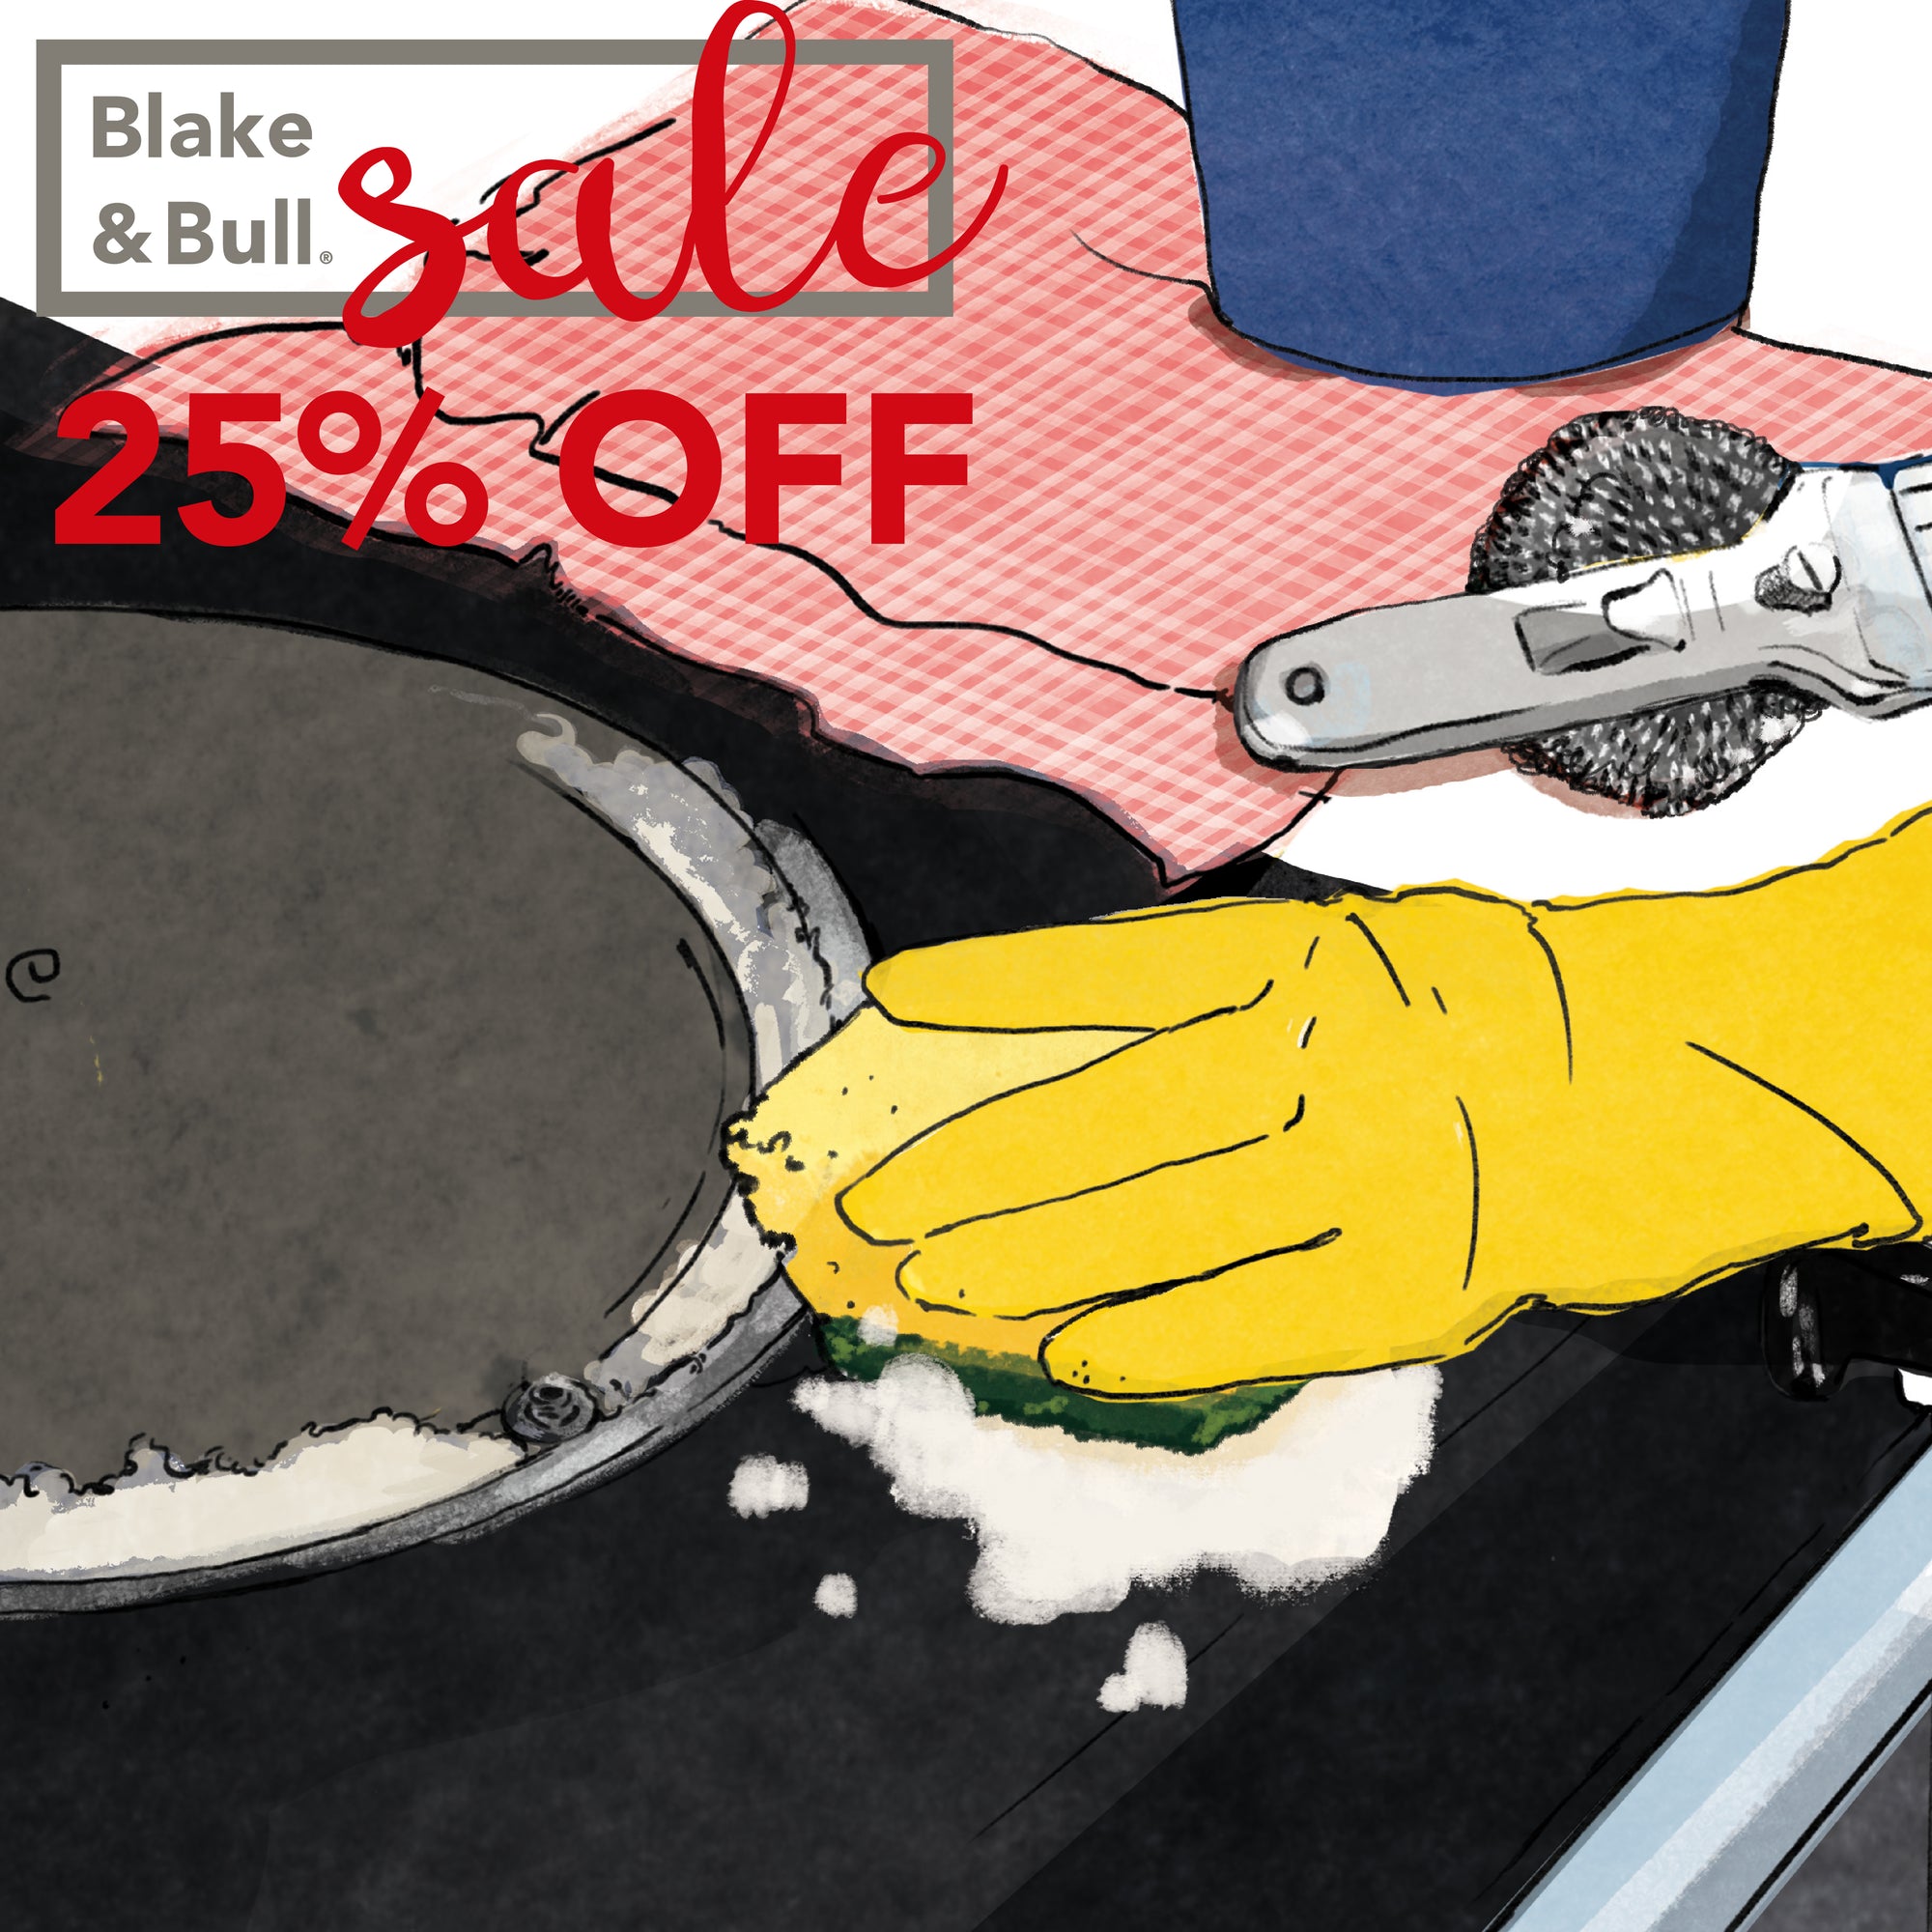 Cleaning kits 25% off in the Winter Sale, get spring ready!